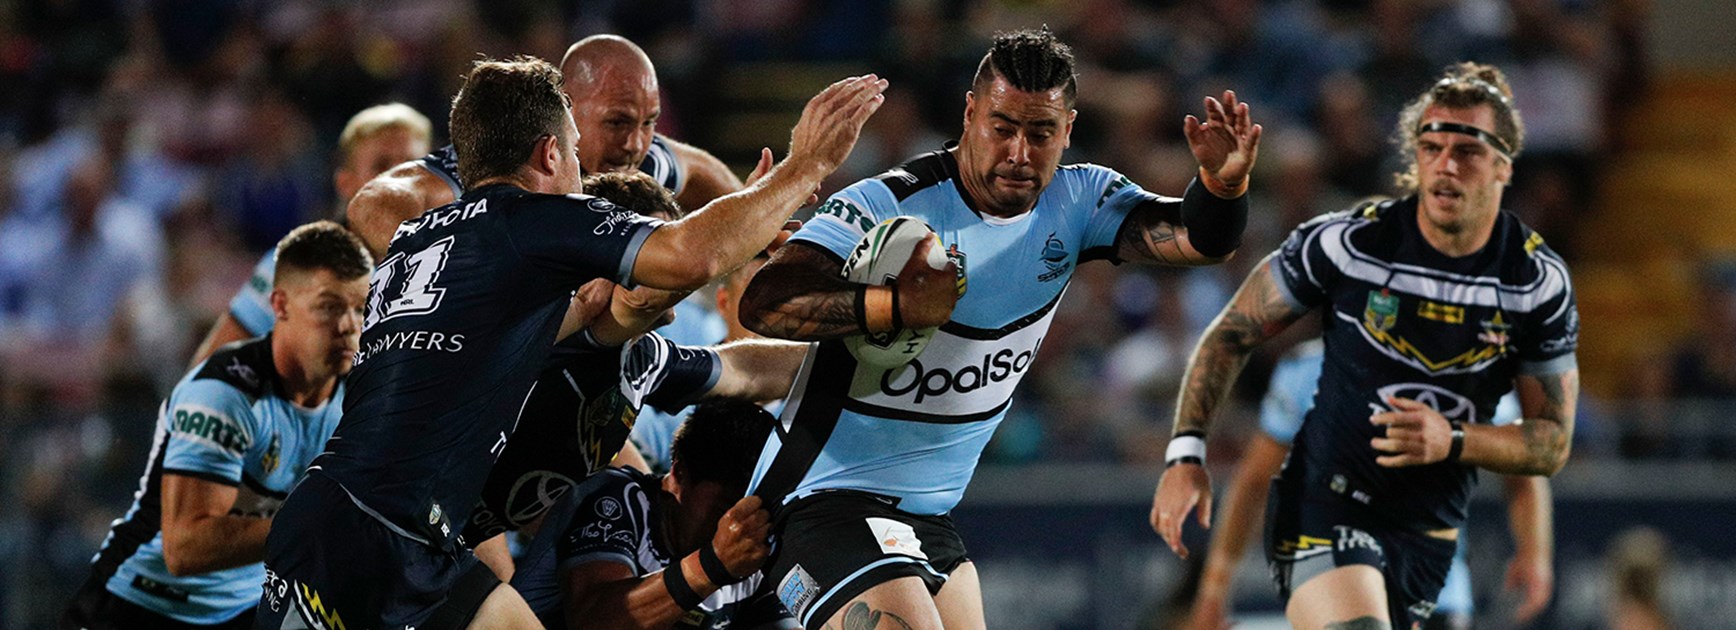 Match Report - Sharks slip to round one loss